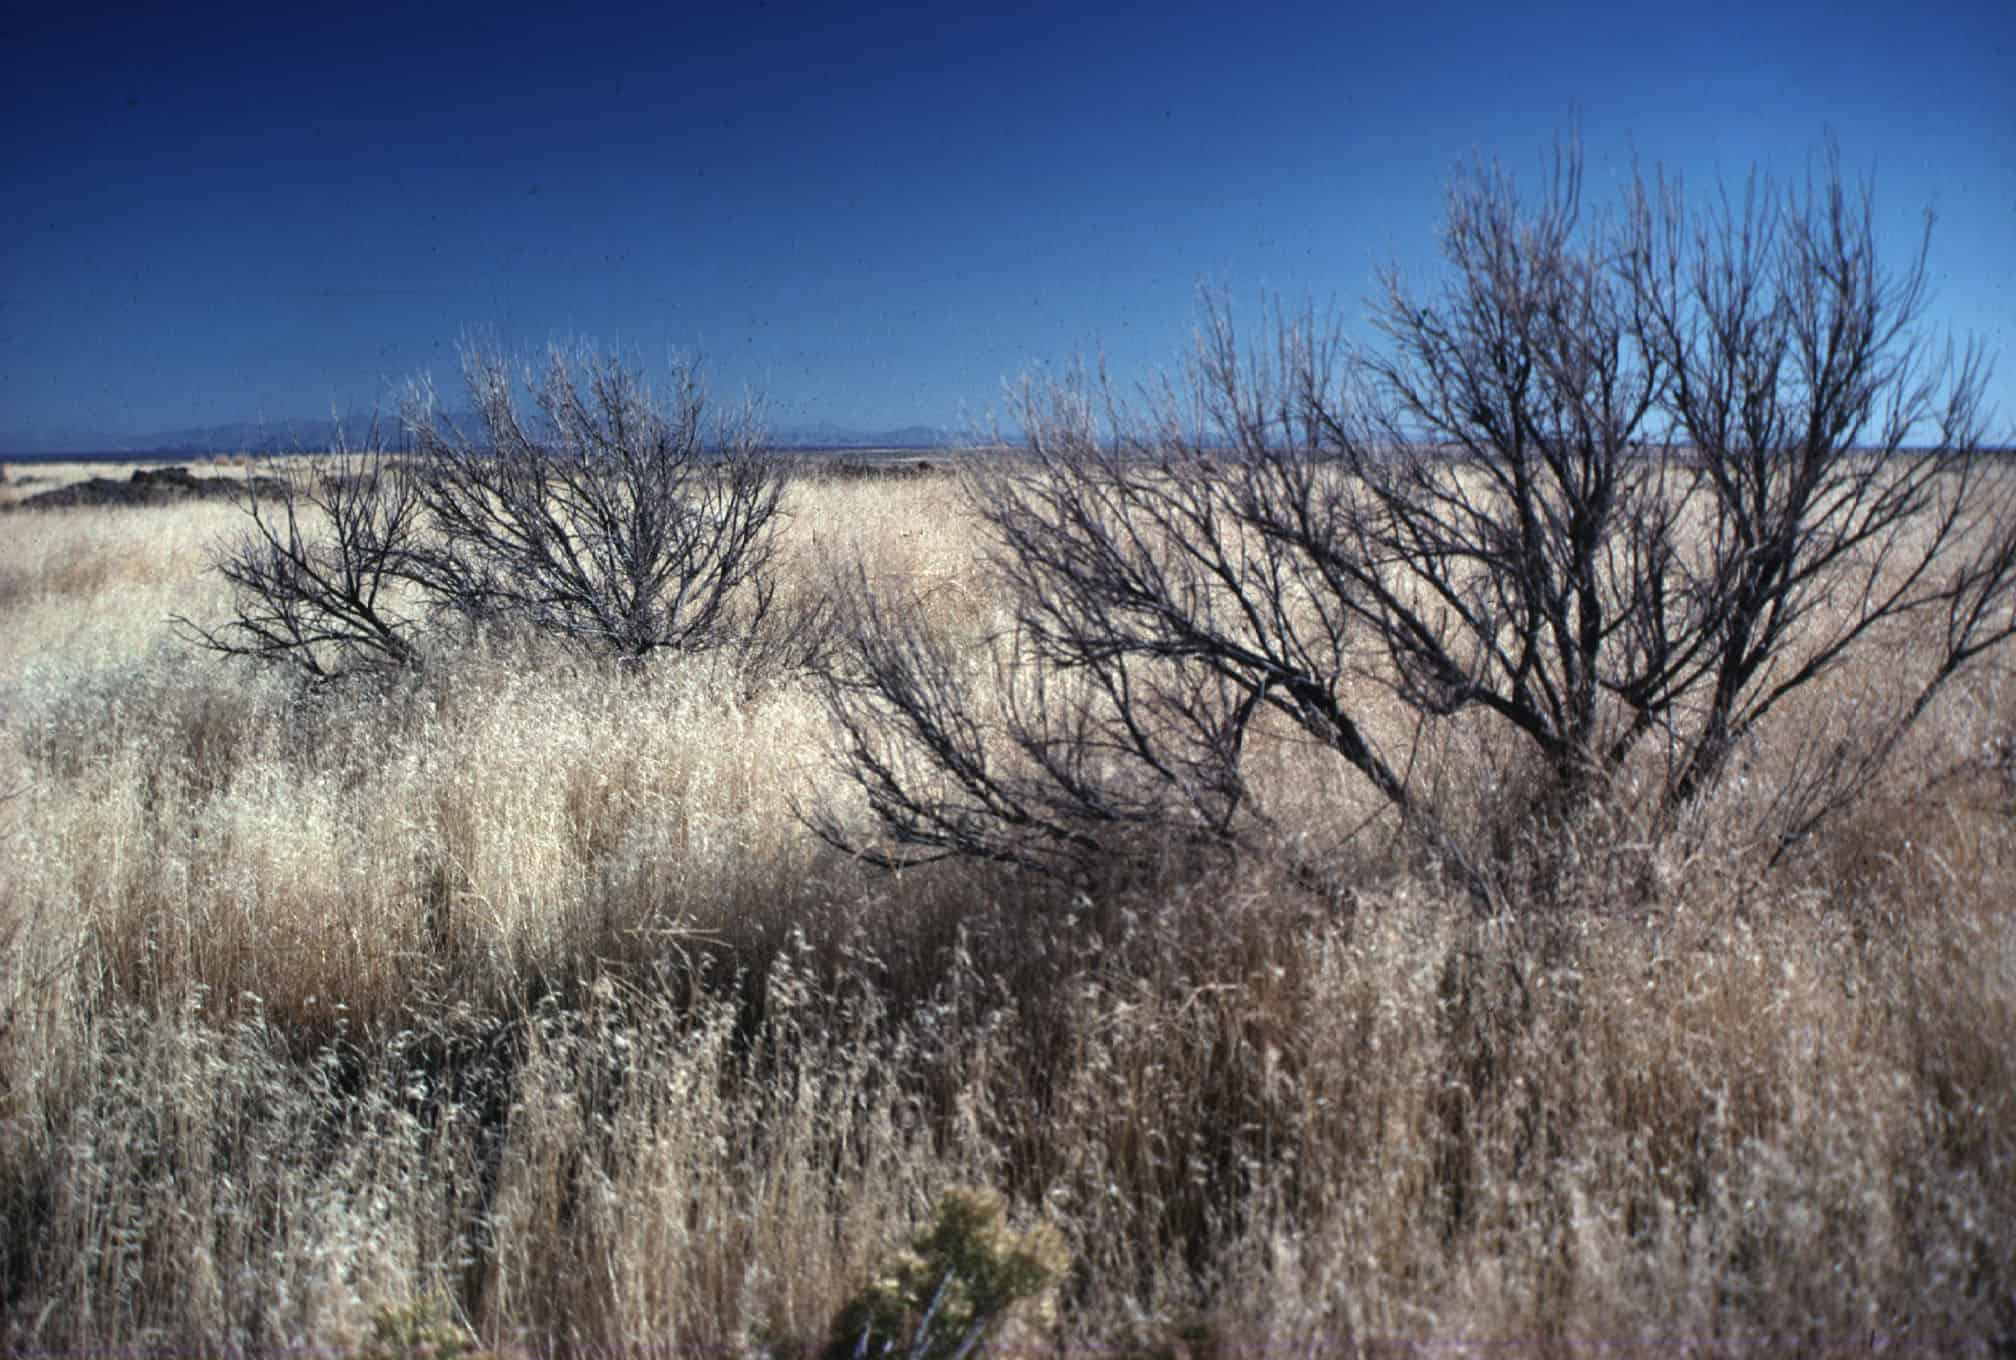 Amid the skeletons of burned sagebrush, cheatgrass creates a monoculture if untreated post-wildfire. Photo: Mike Pellant